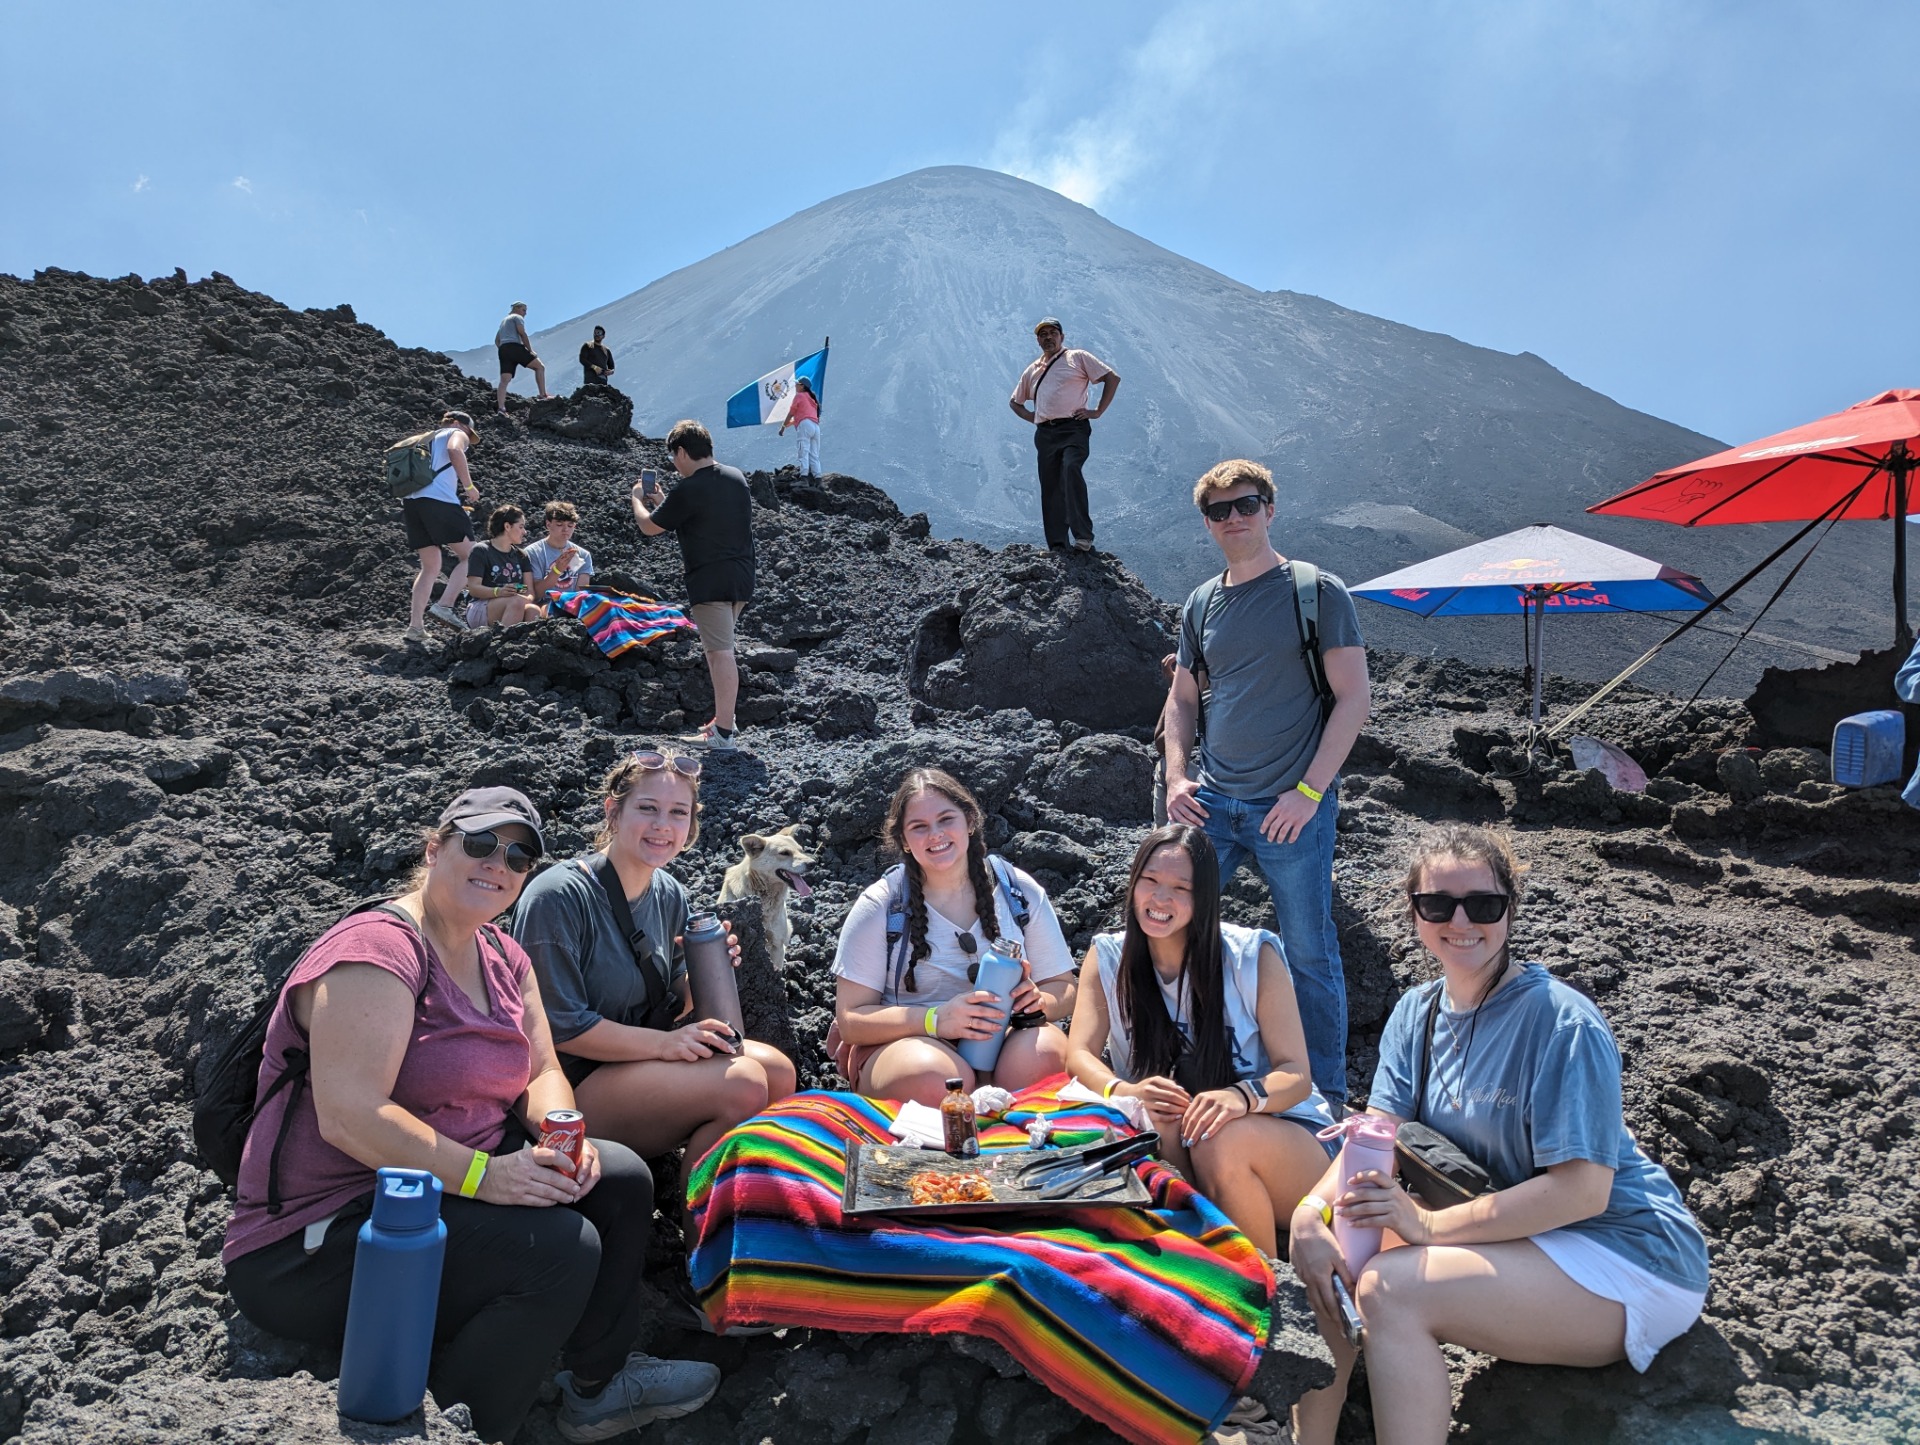 Pizza on a Volcano!